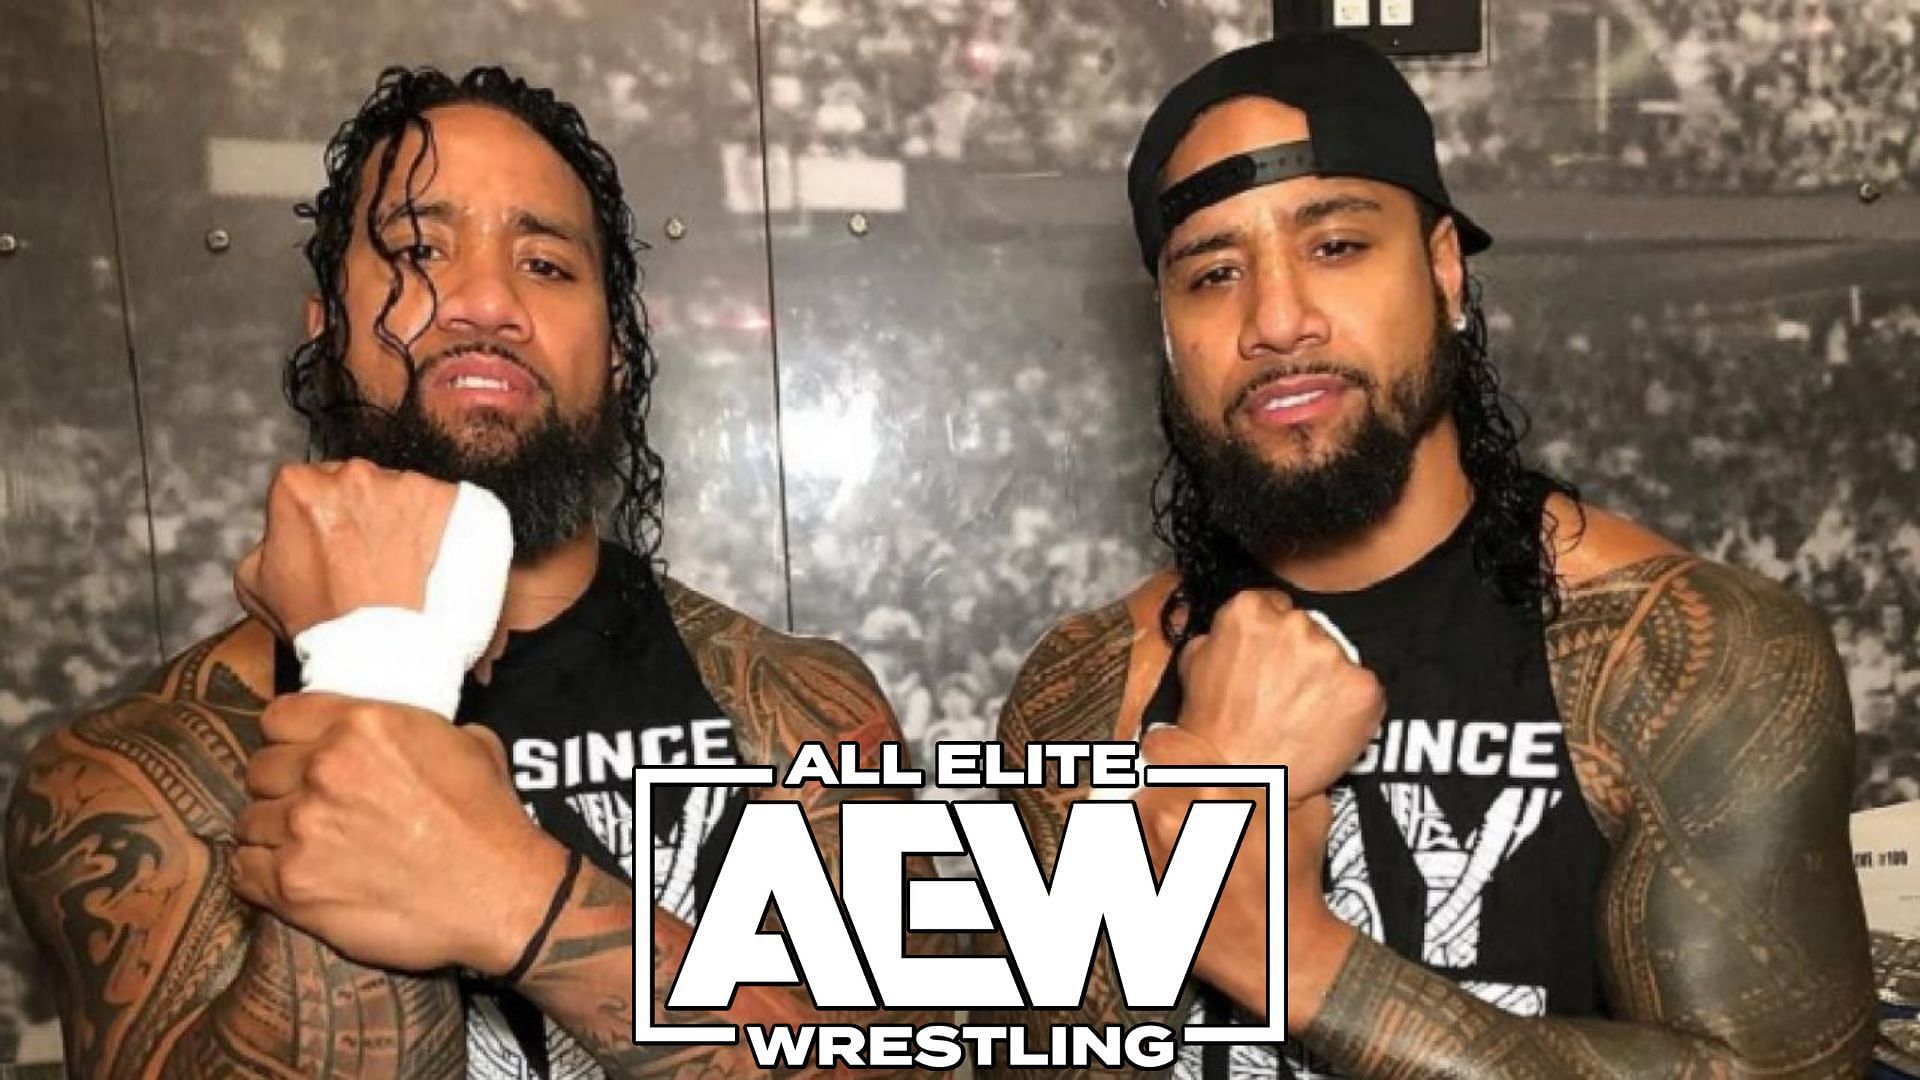 Are The Usos better than any talent AEW has?